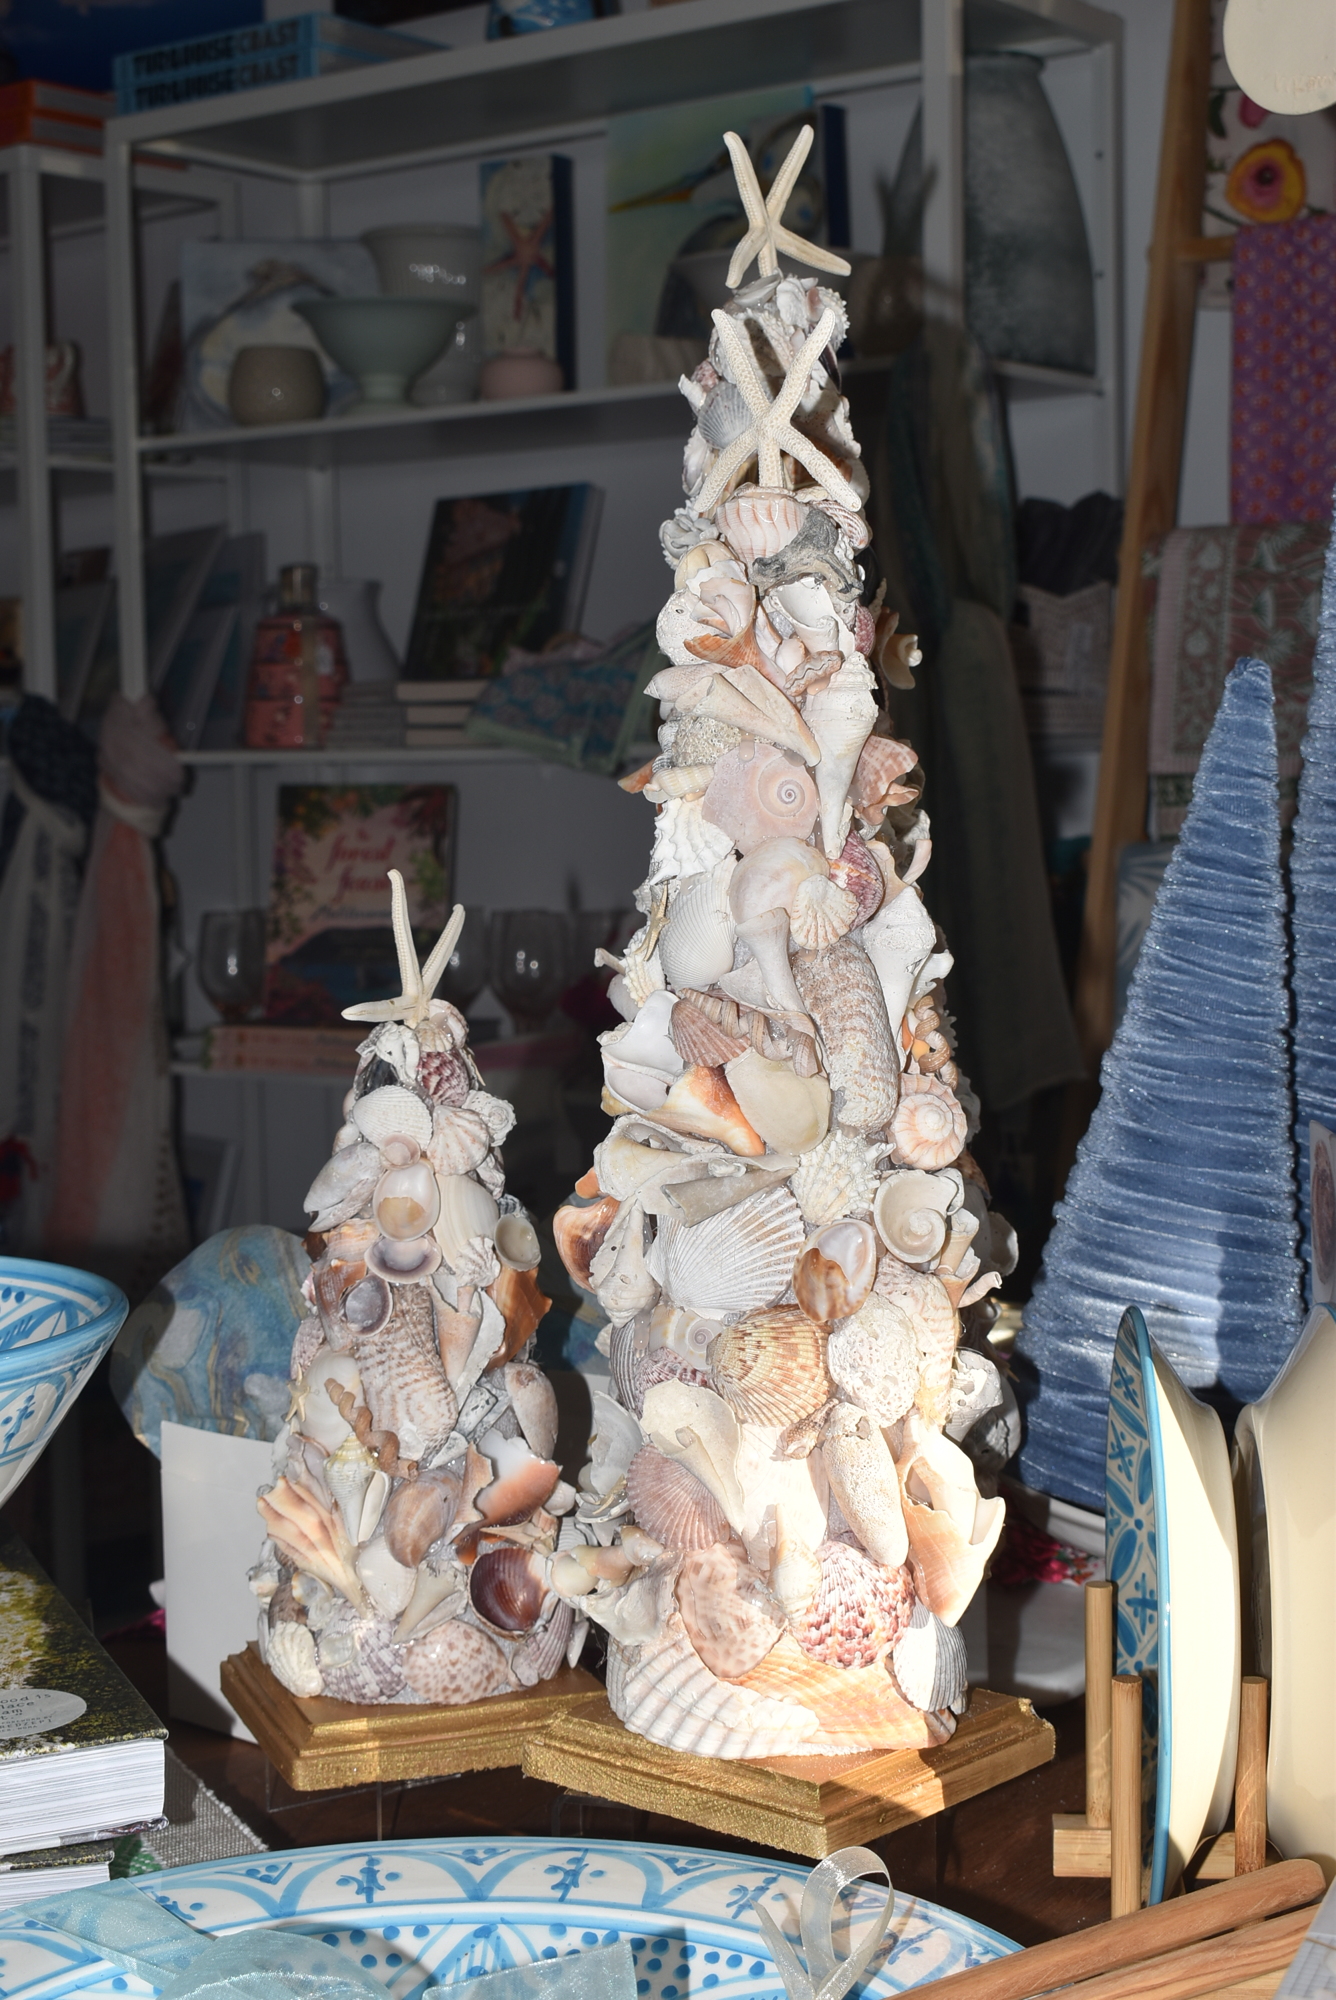 Heather Rippy decked out her store in local decorations like these trees covered in Longboat Key shells.